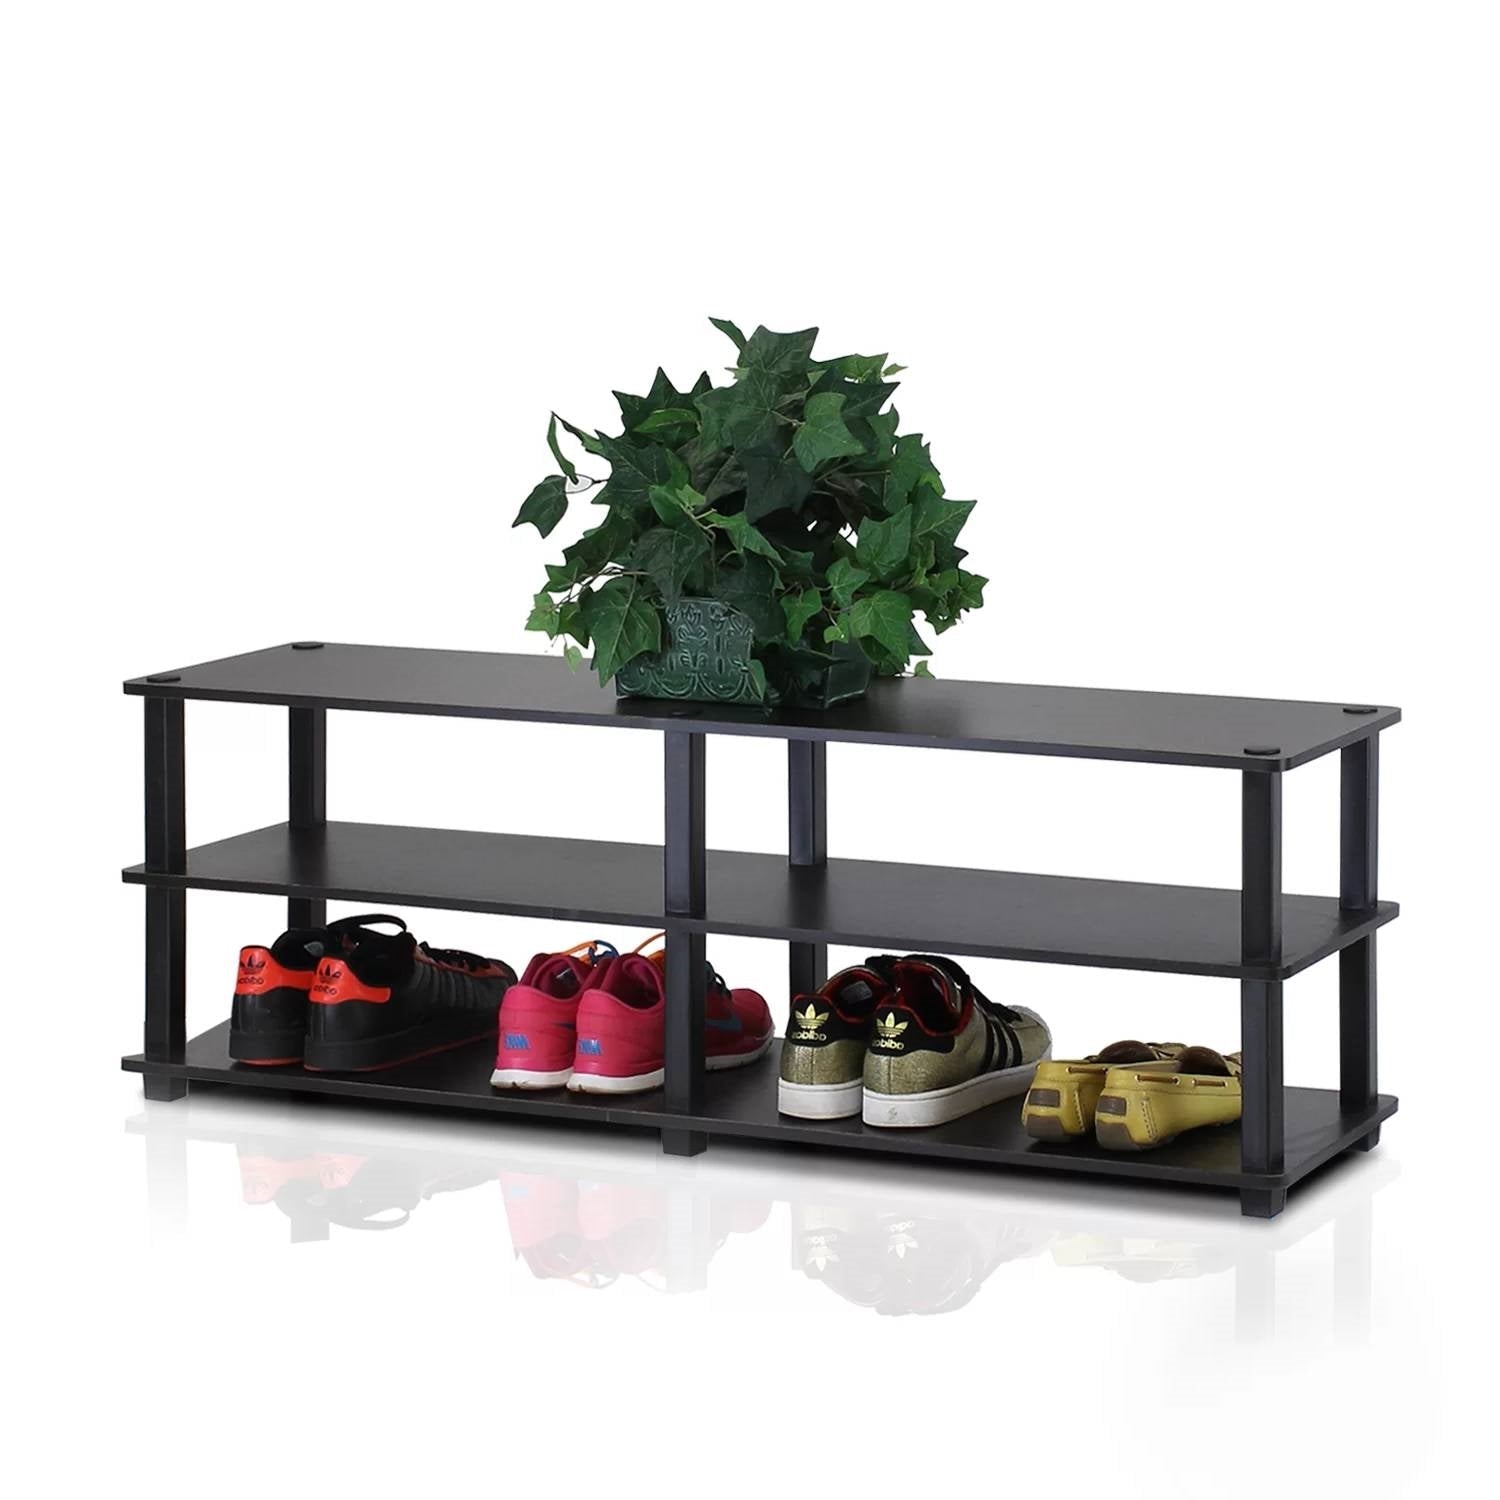 Accents > Shoe Racks - Modern 3-Shelf Espresso Black Shoe Rack - Holds Up To 18 Pair Of Shoes